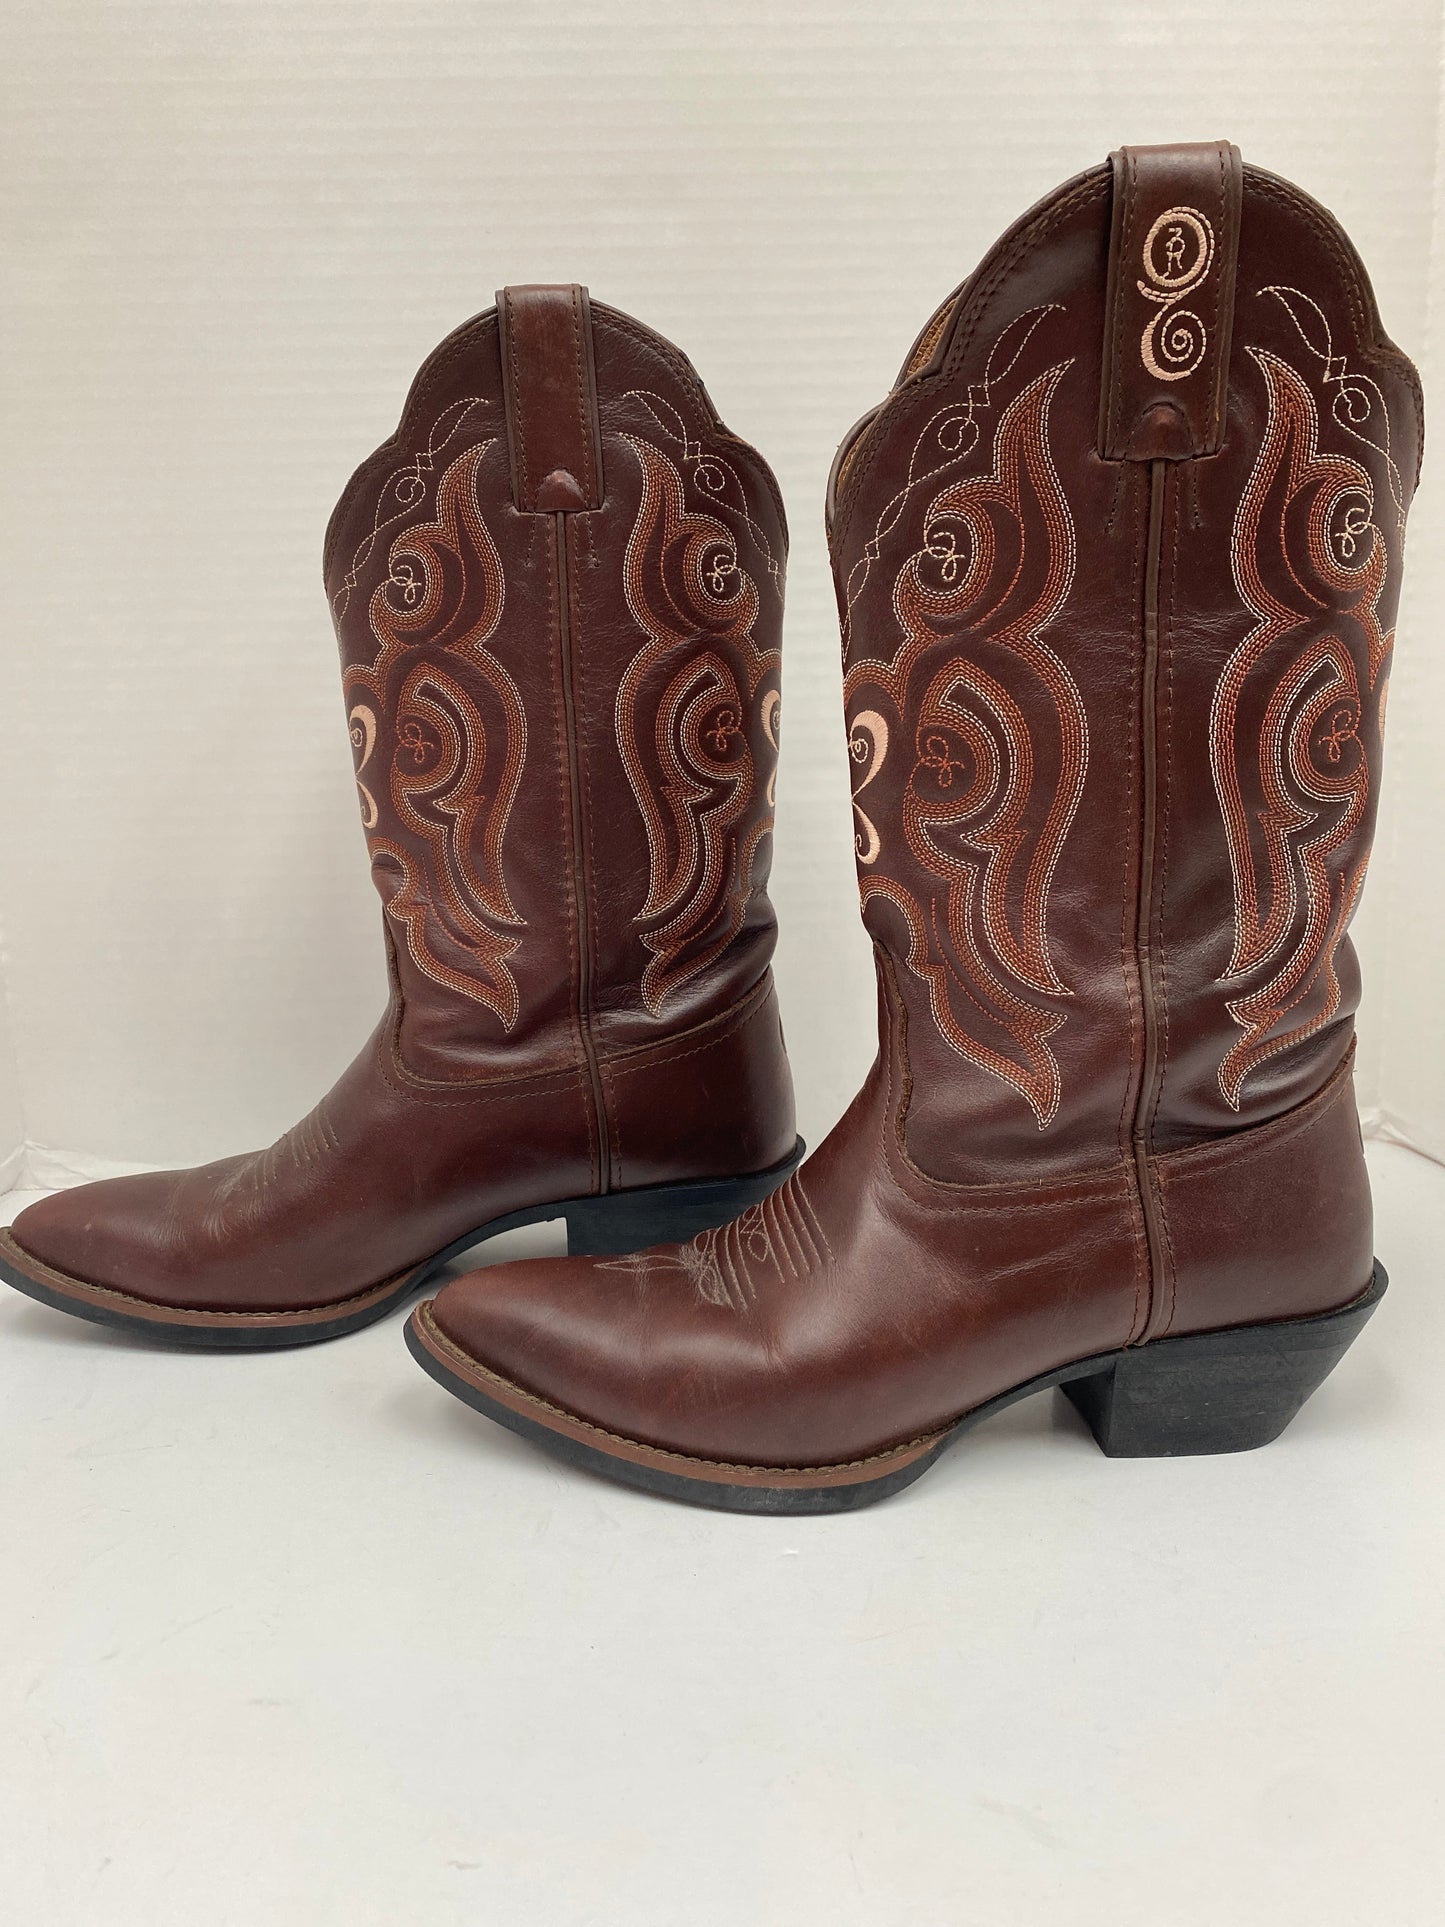 Brown Boots Western Tony Lama, Size 7